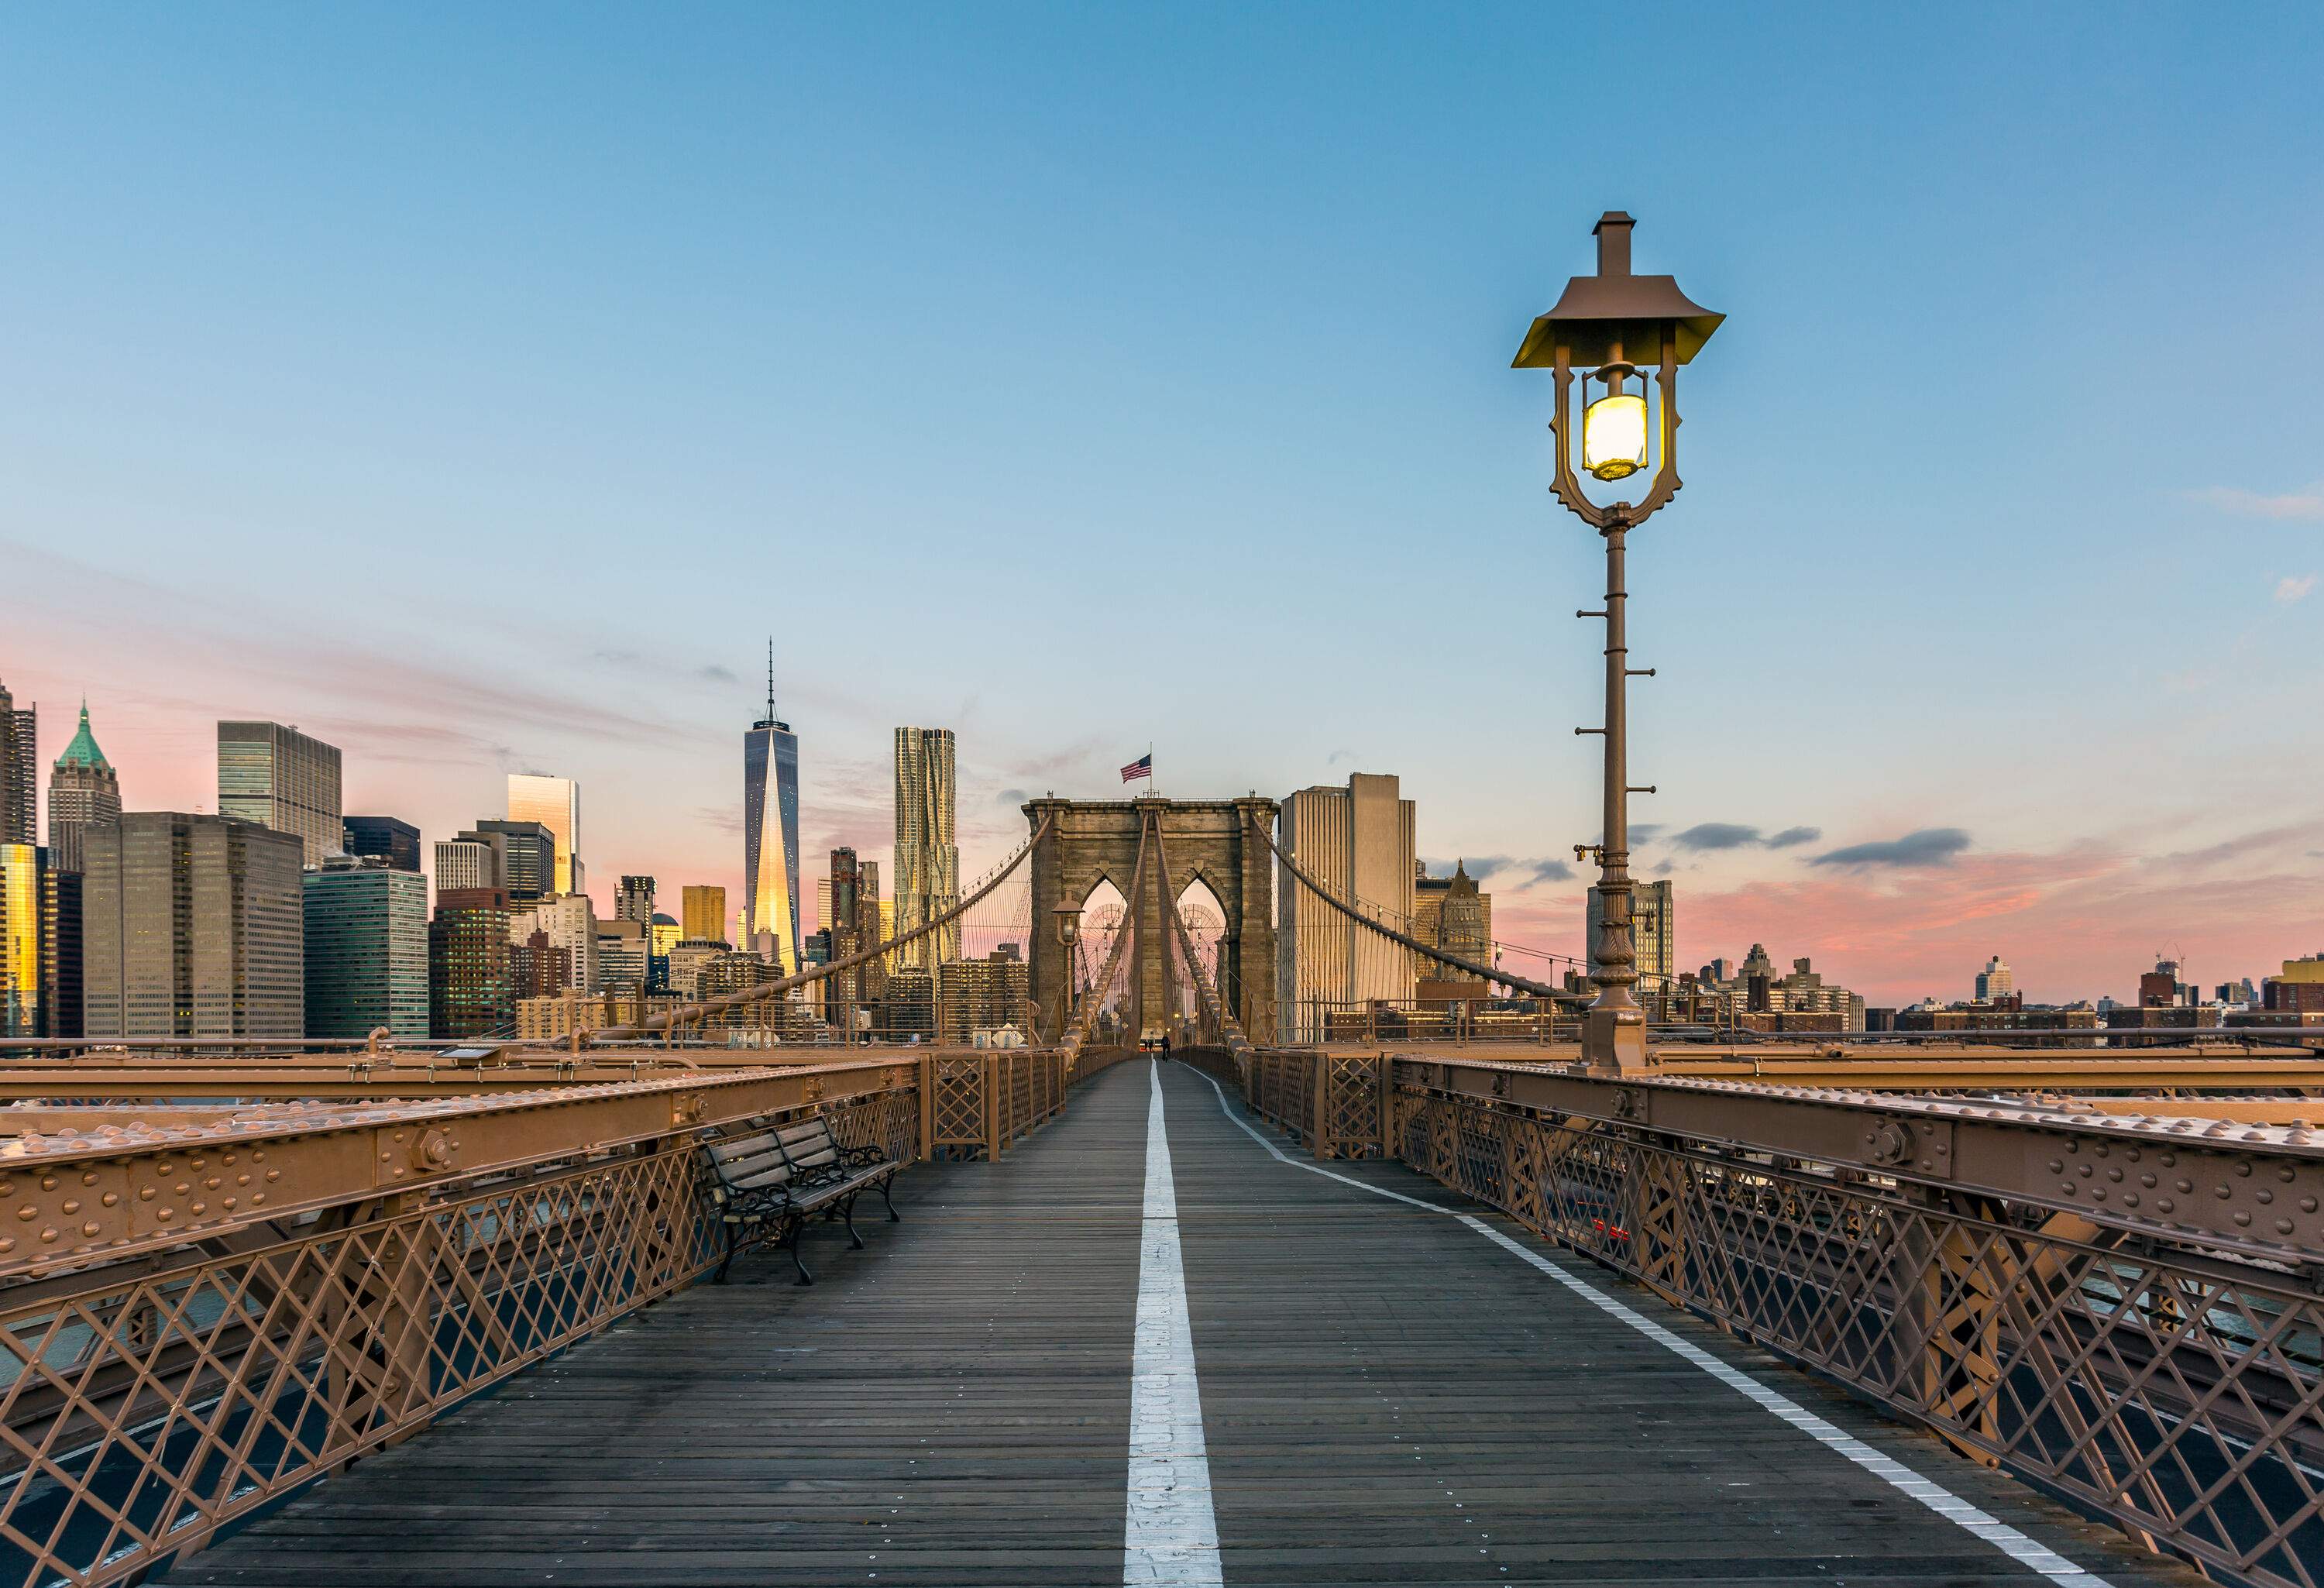 A relatively empty Brooklyn Bridge with a bench on the side and lofty skyscrapers in the surrounding area.